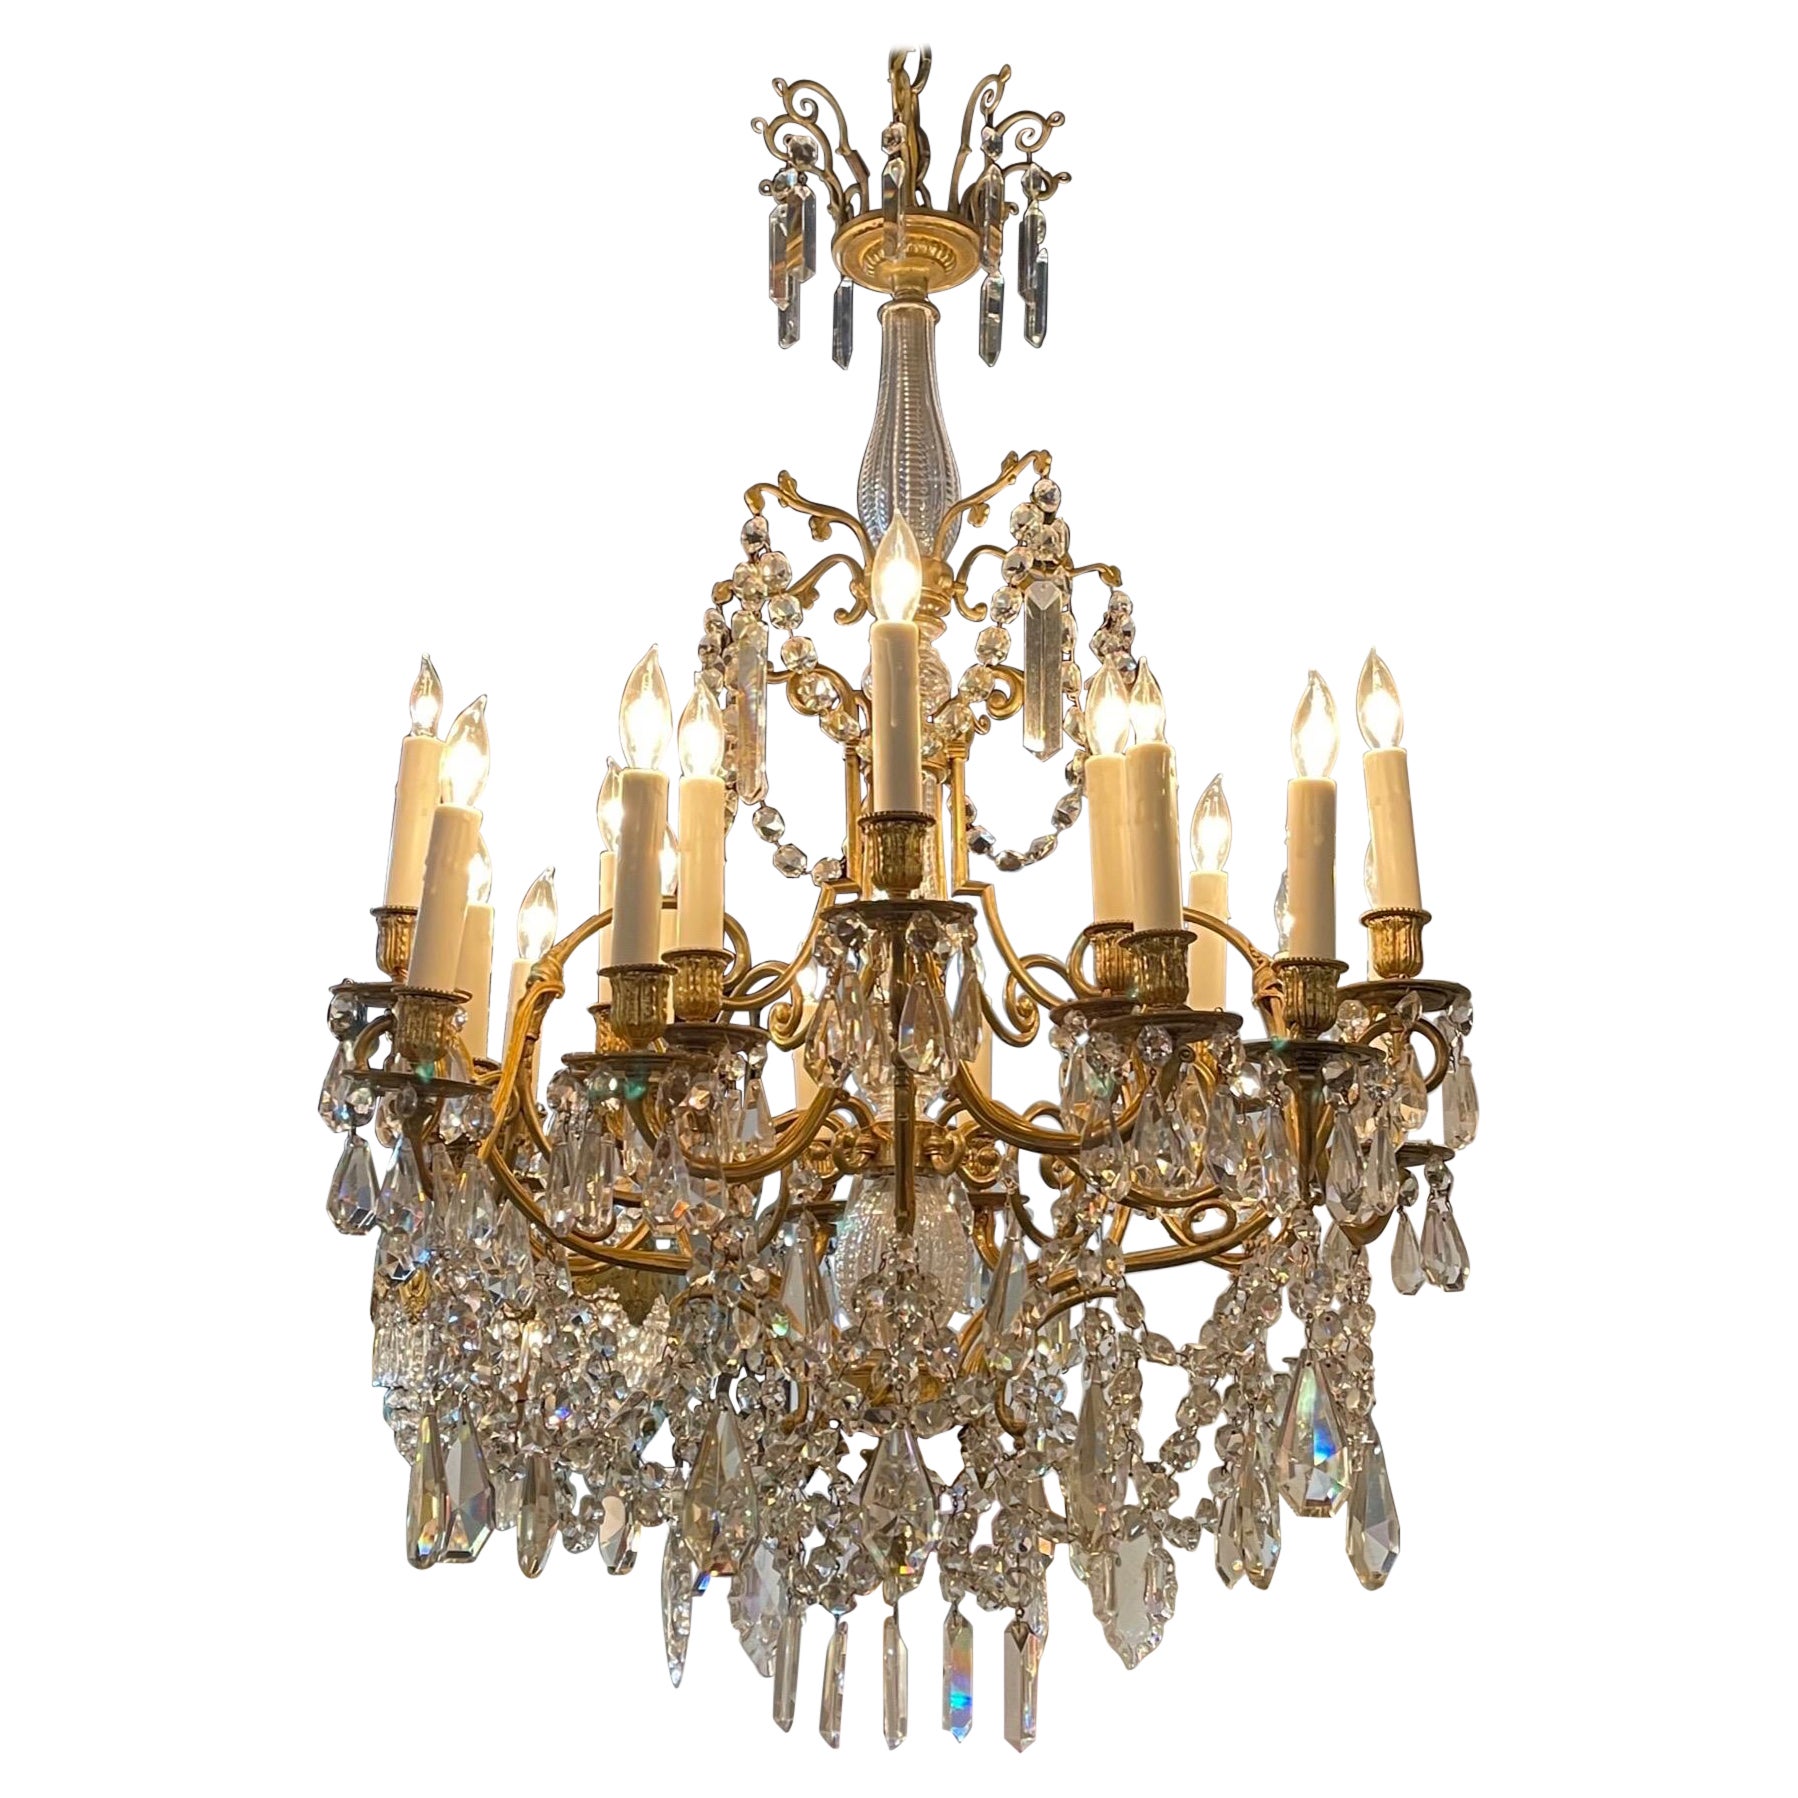 19th Century French Gilt Bronze and Crystal 20 Light Chandelier For Sale